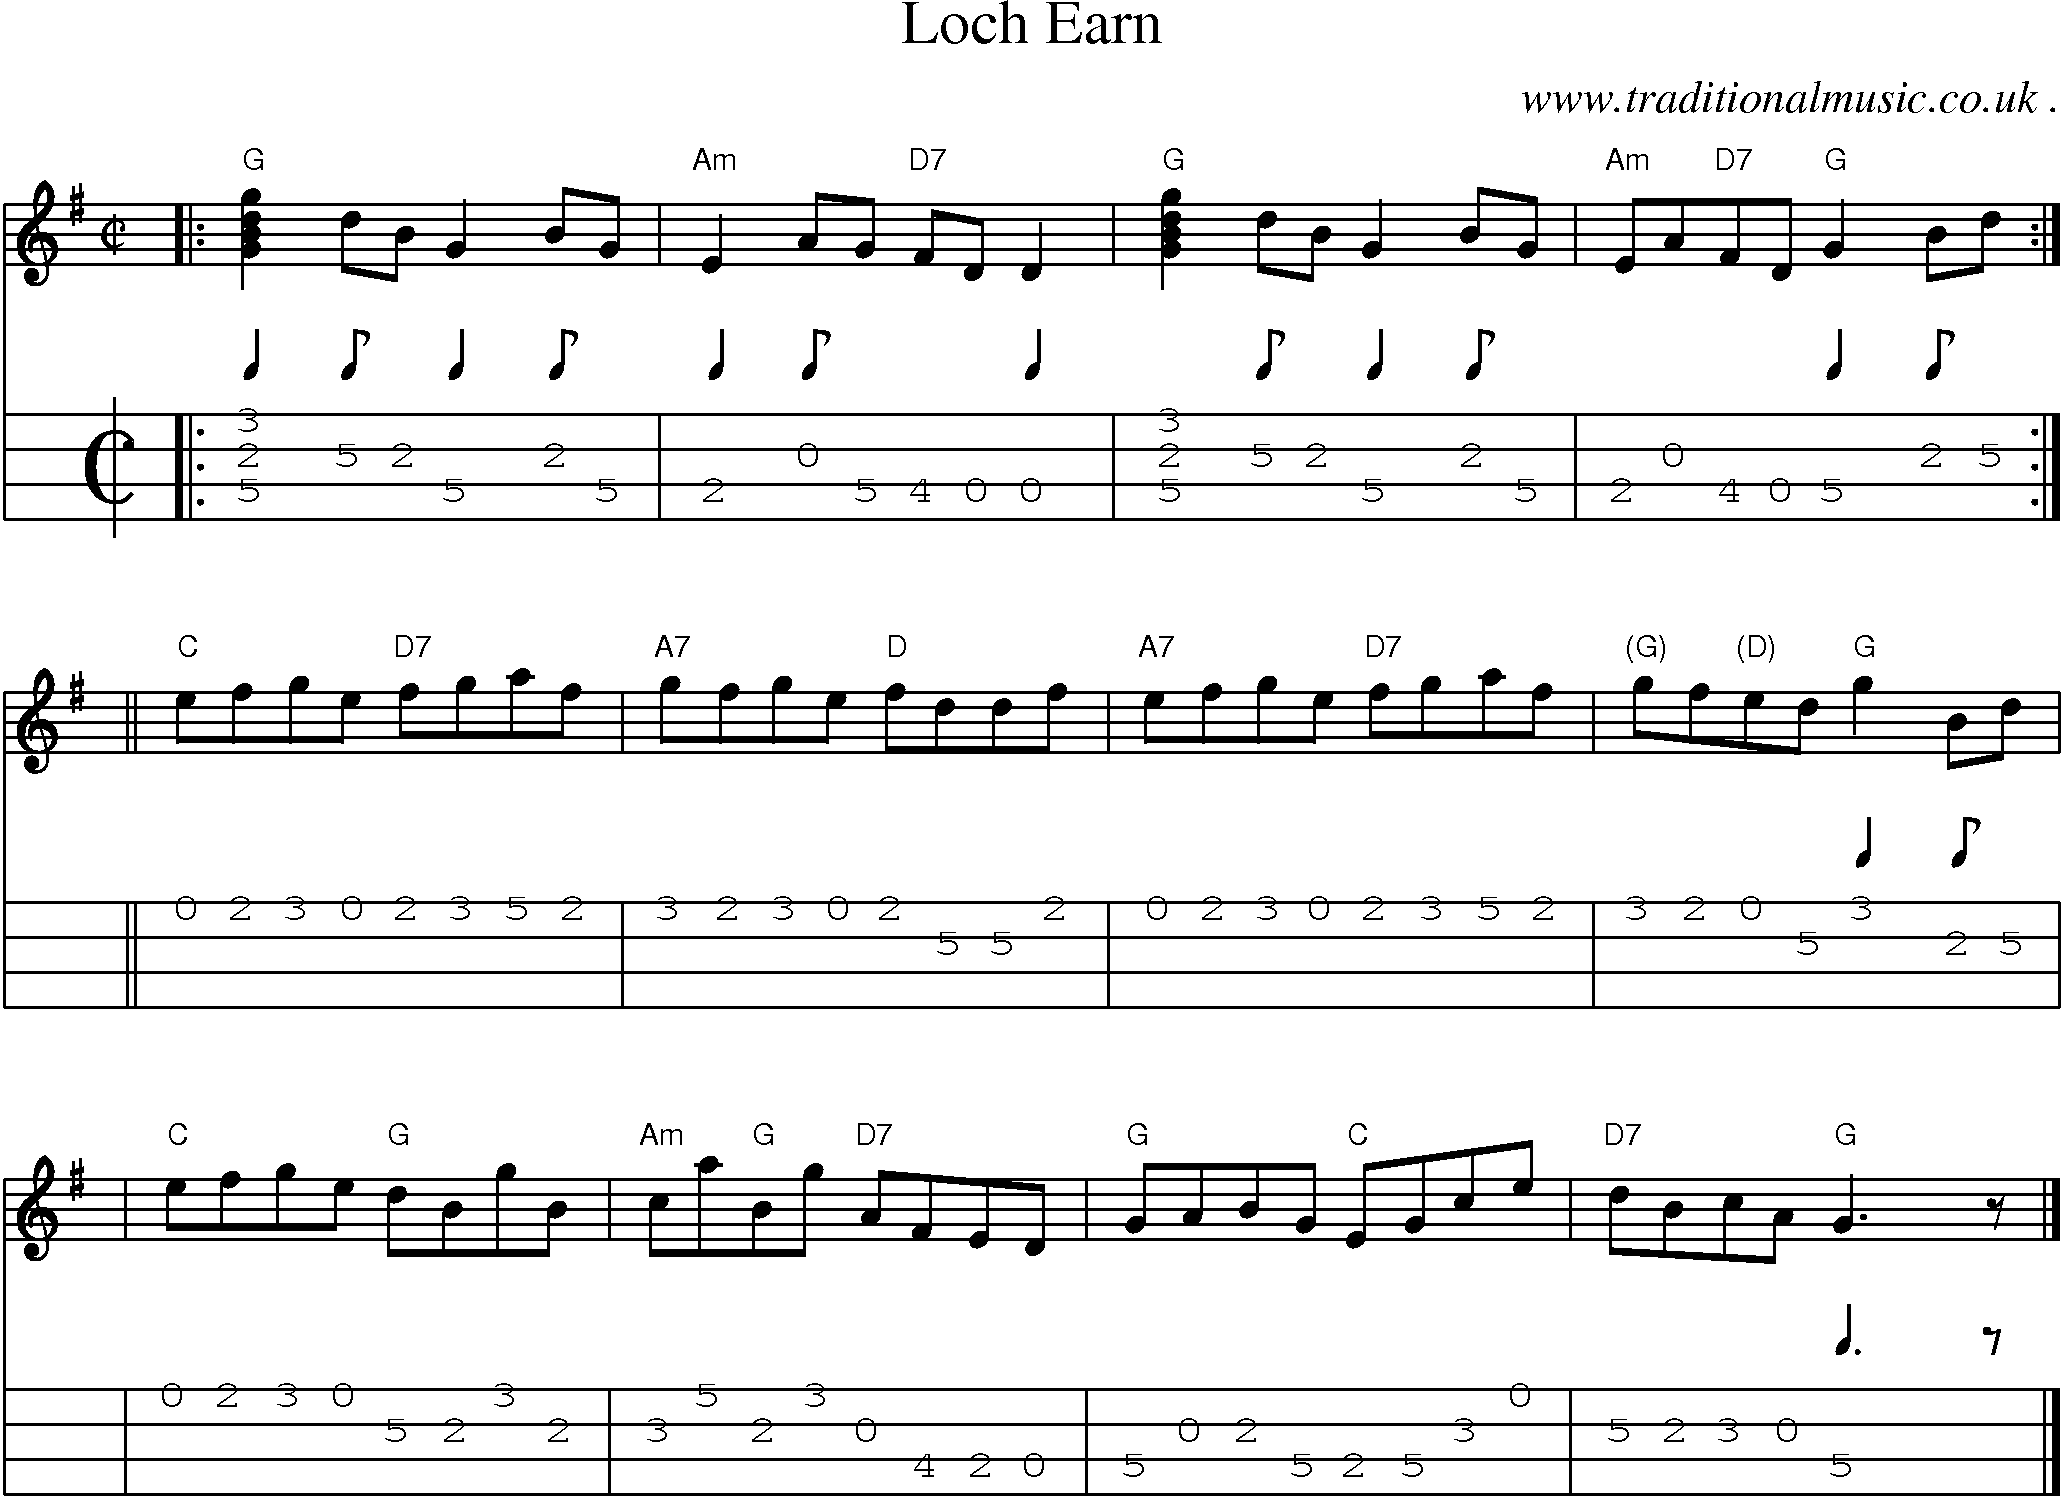 Sheet-music  score, Chords and Mandolin Tabs for Loch Earn